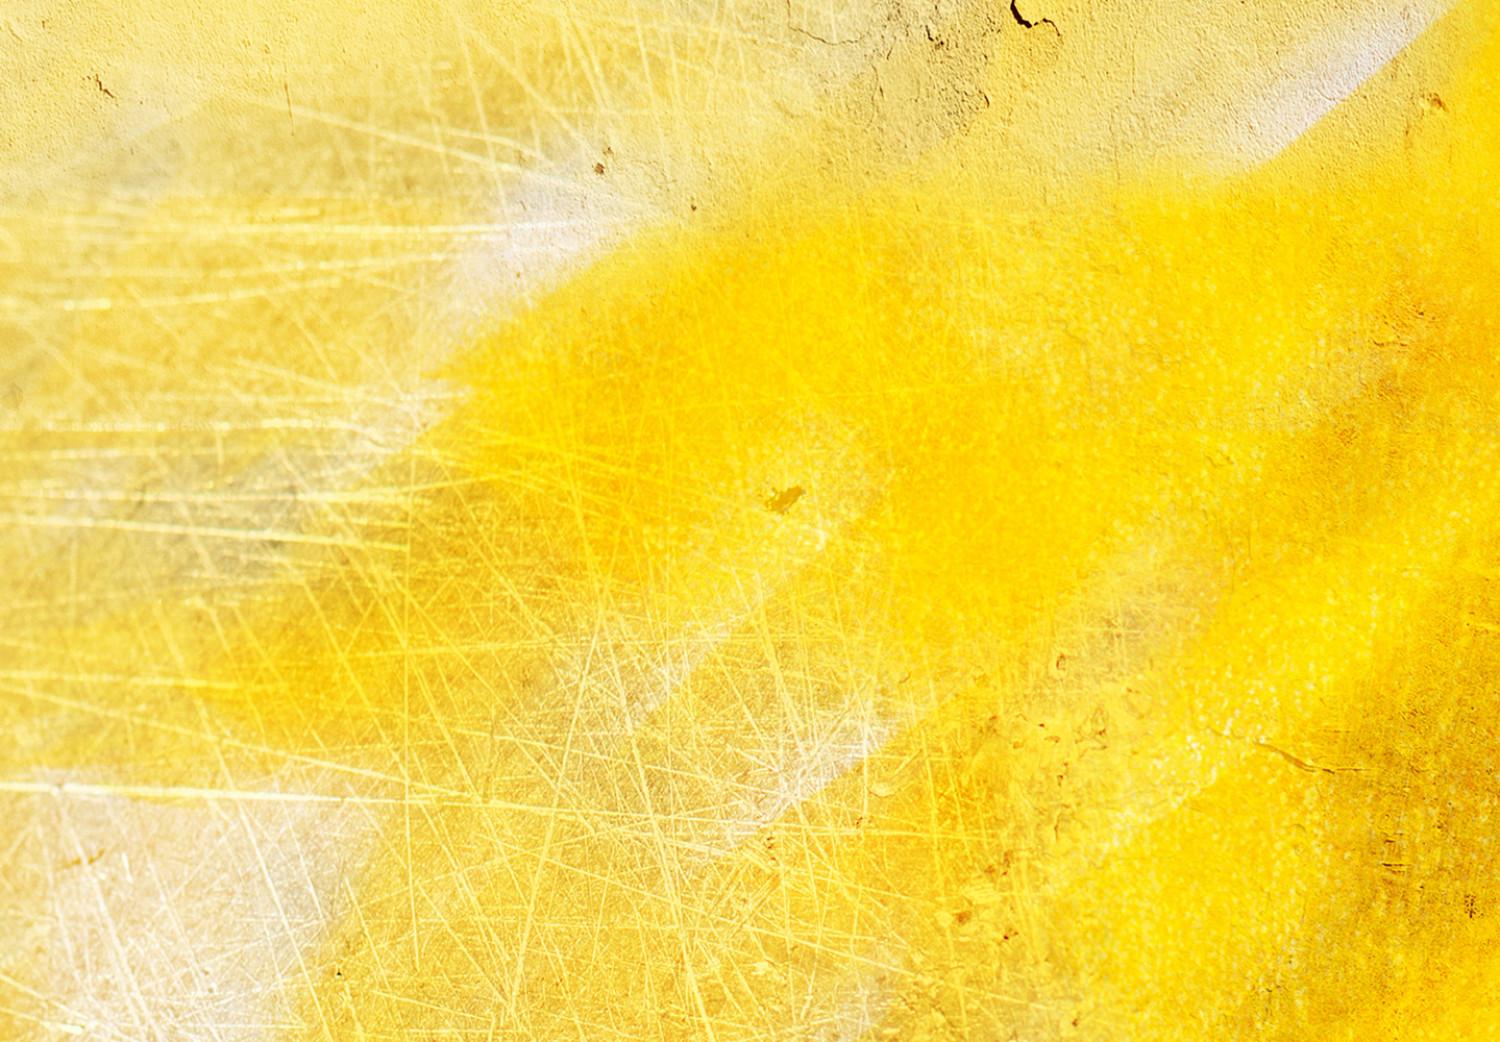 Poster Sunny Heart - abstraction with a love symbol in shades of yellow